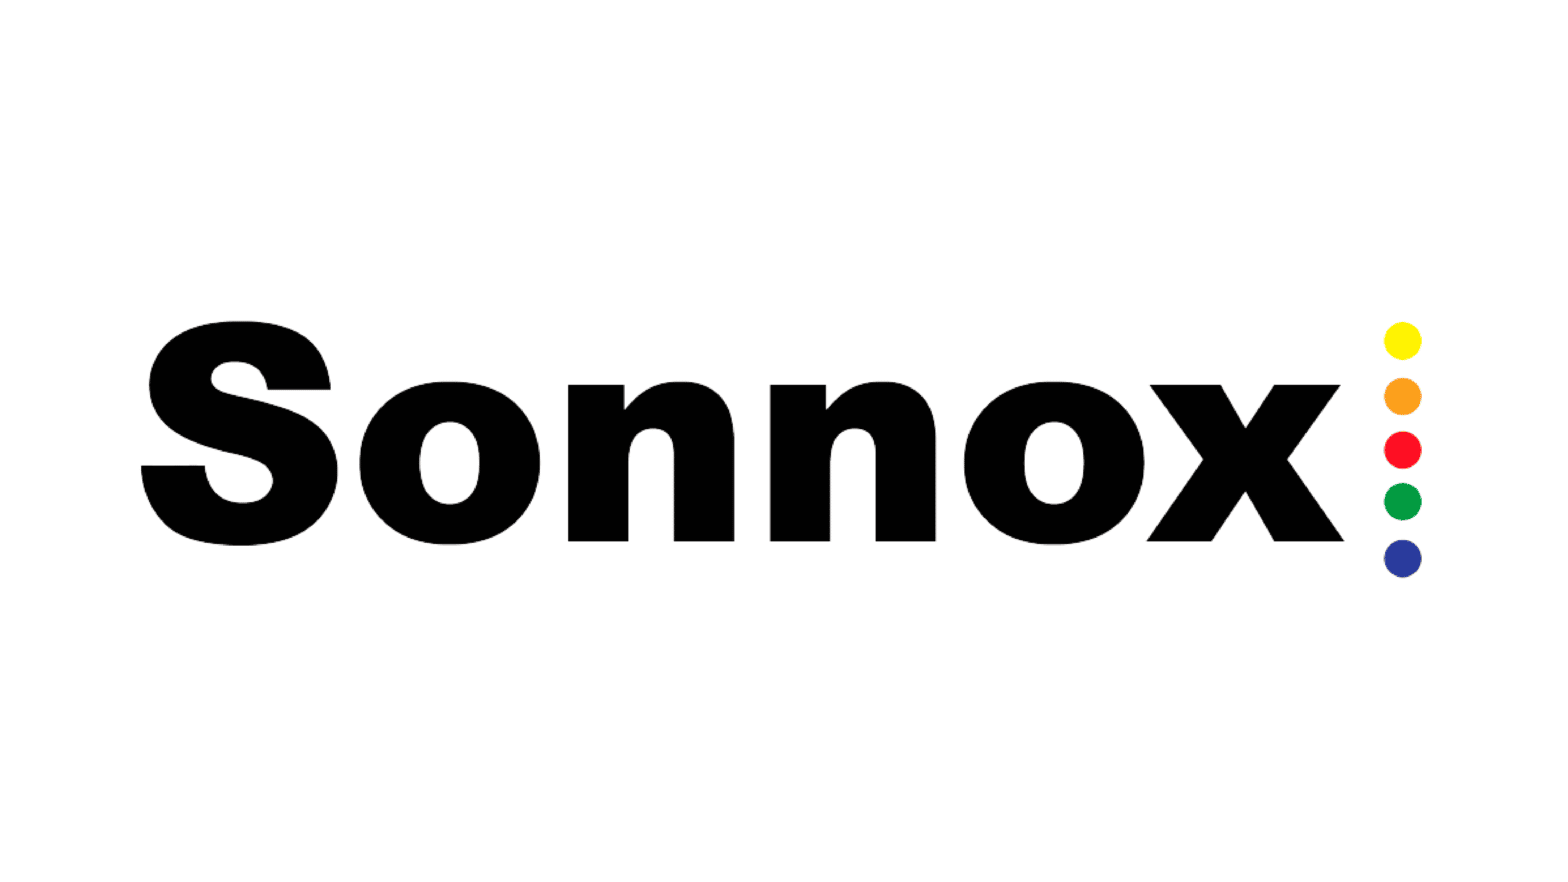 A picture of the Sonnox logo.